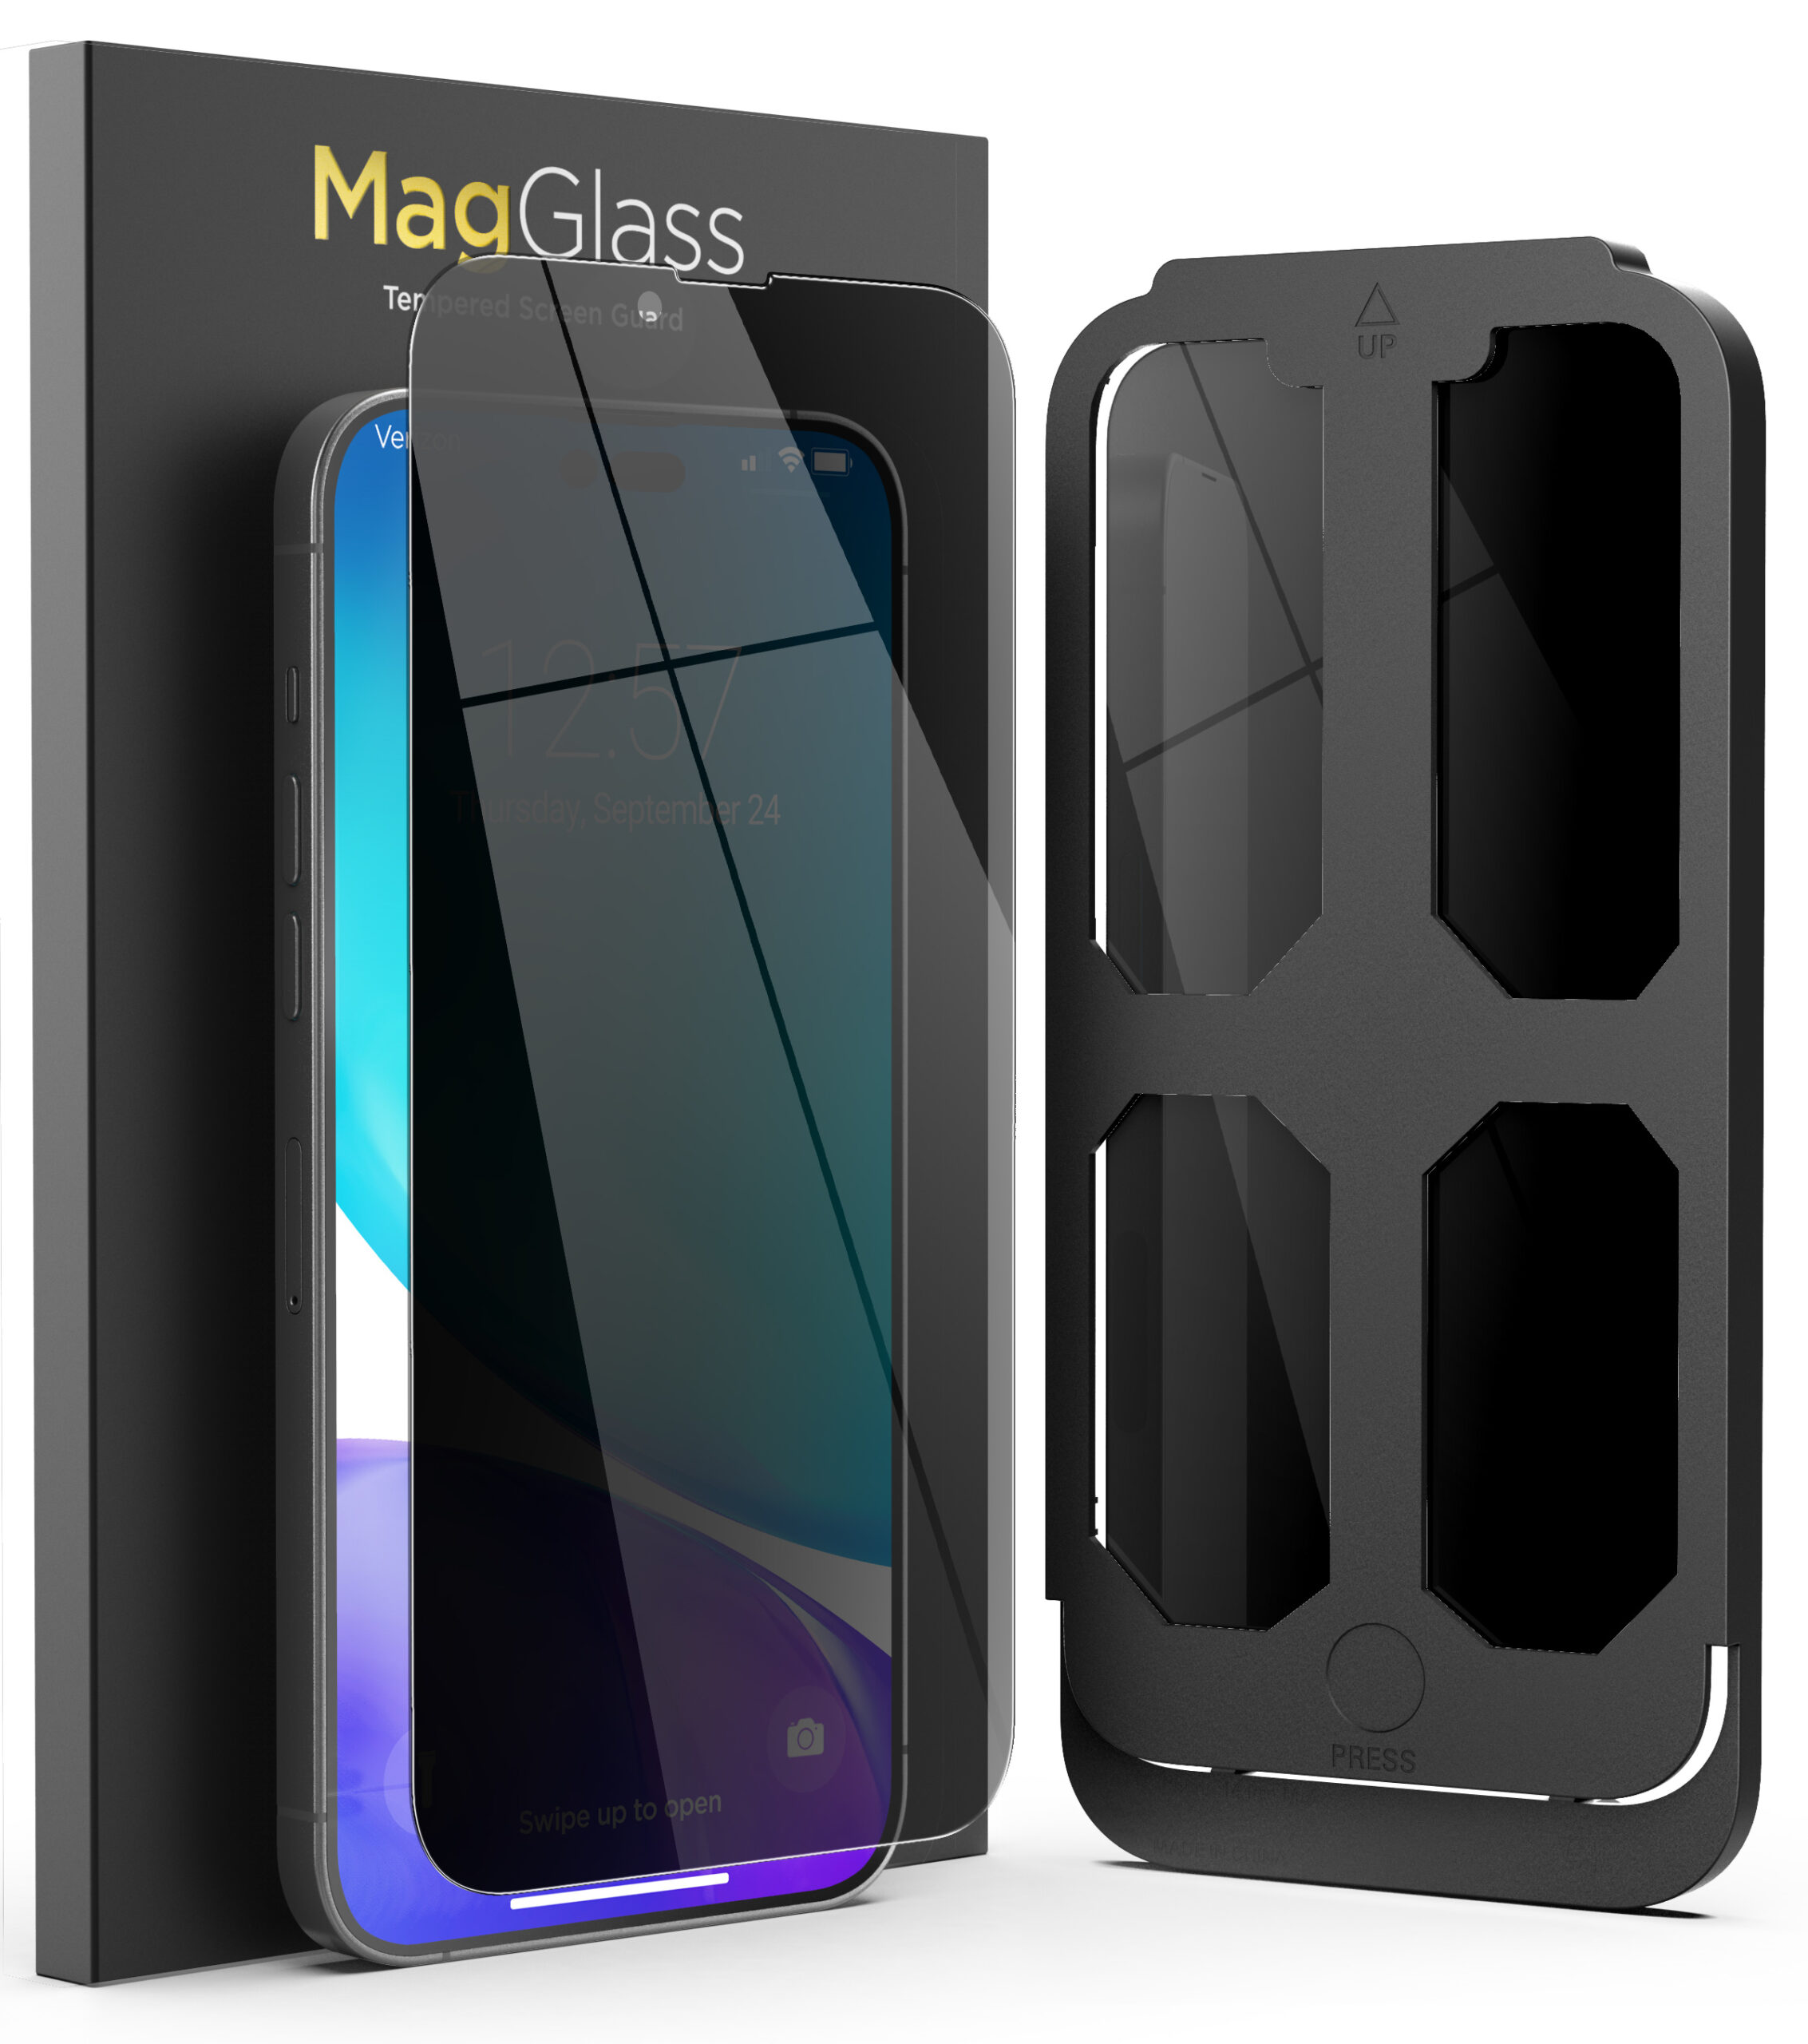 iPhone 14 Pro Max Privacy Screen Protector - Full Cove